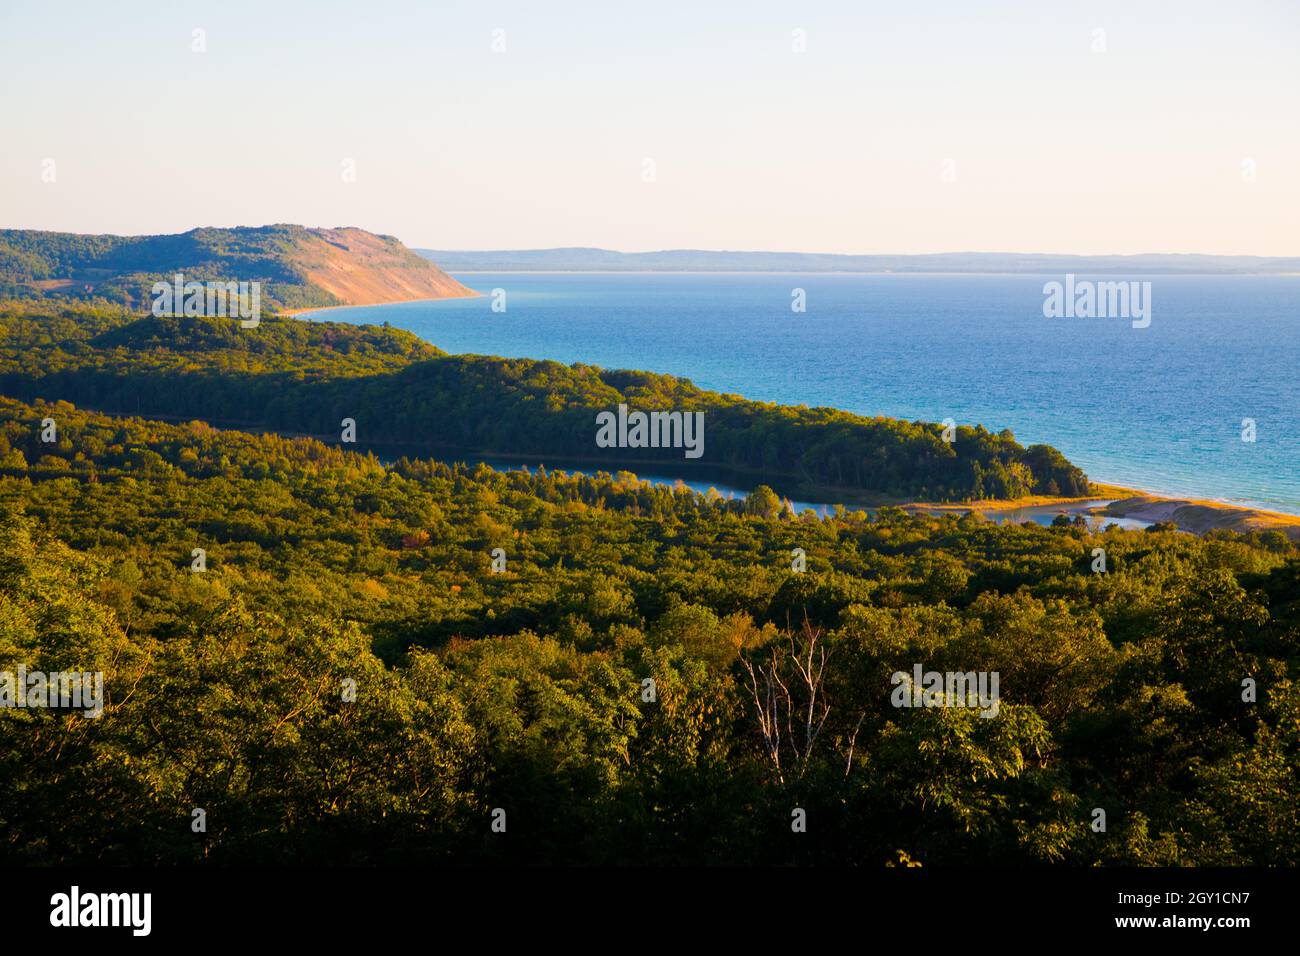 Landscape of trees and a large body of blue water on a clear day Stock Photo